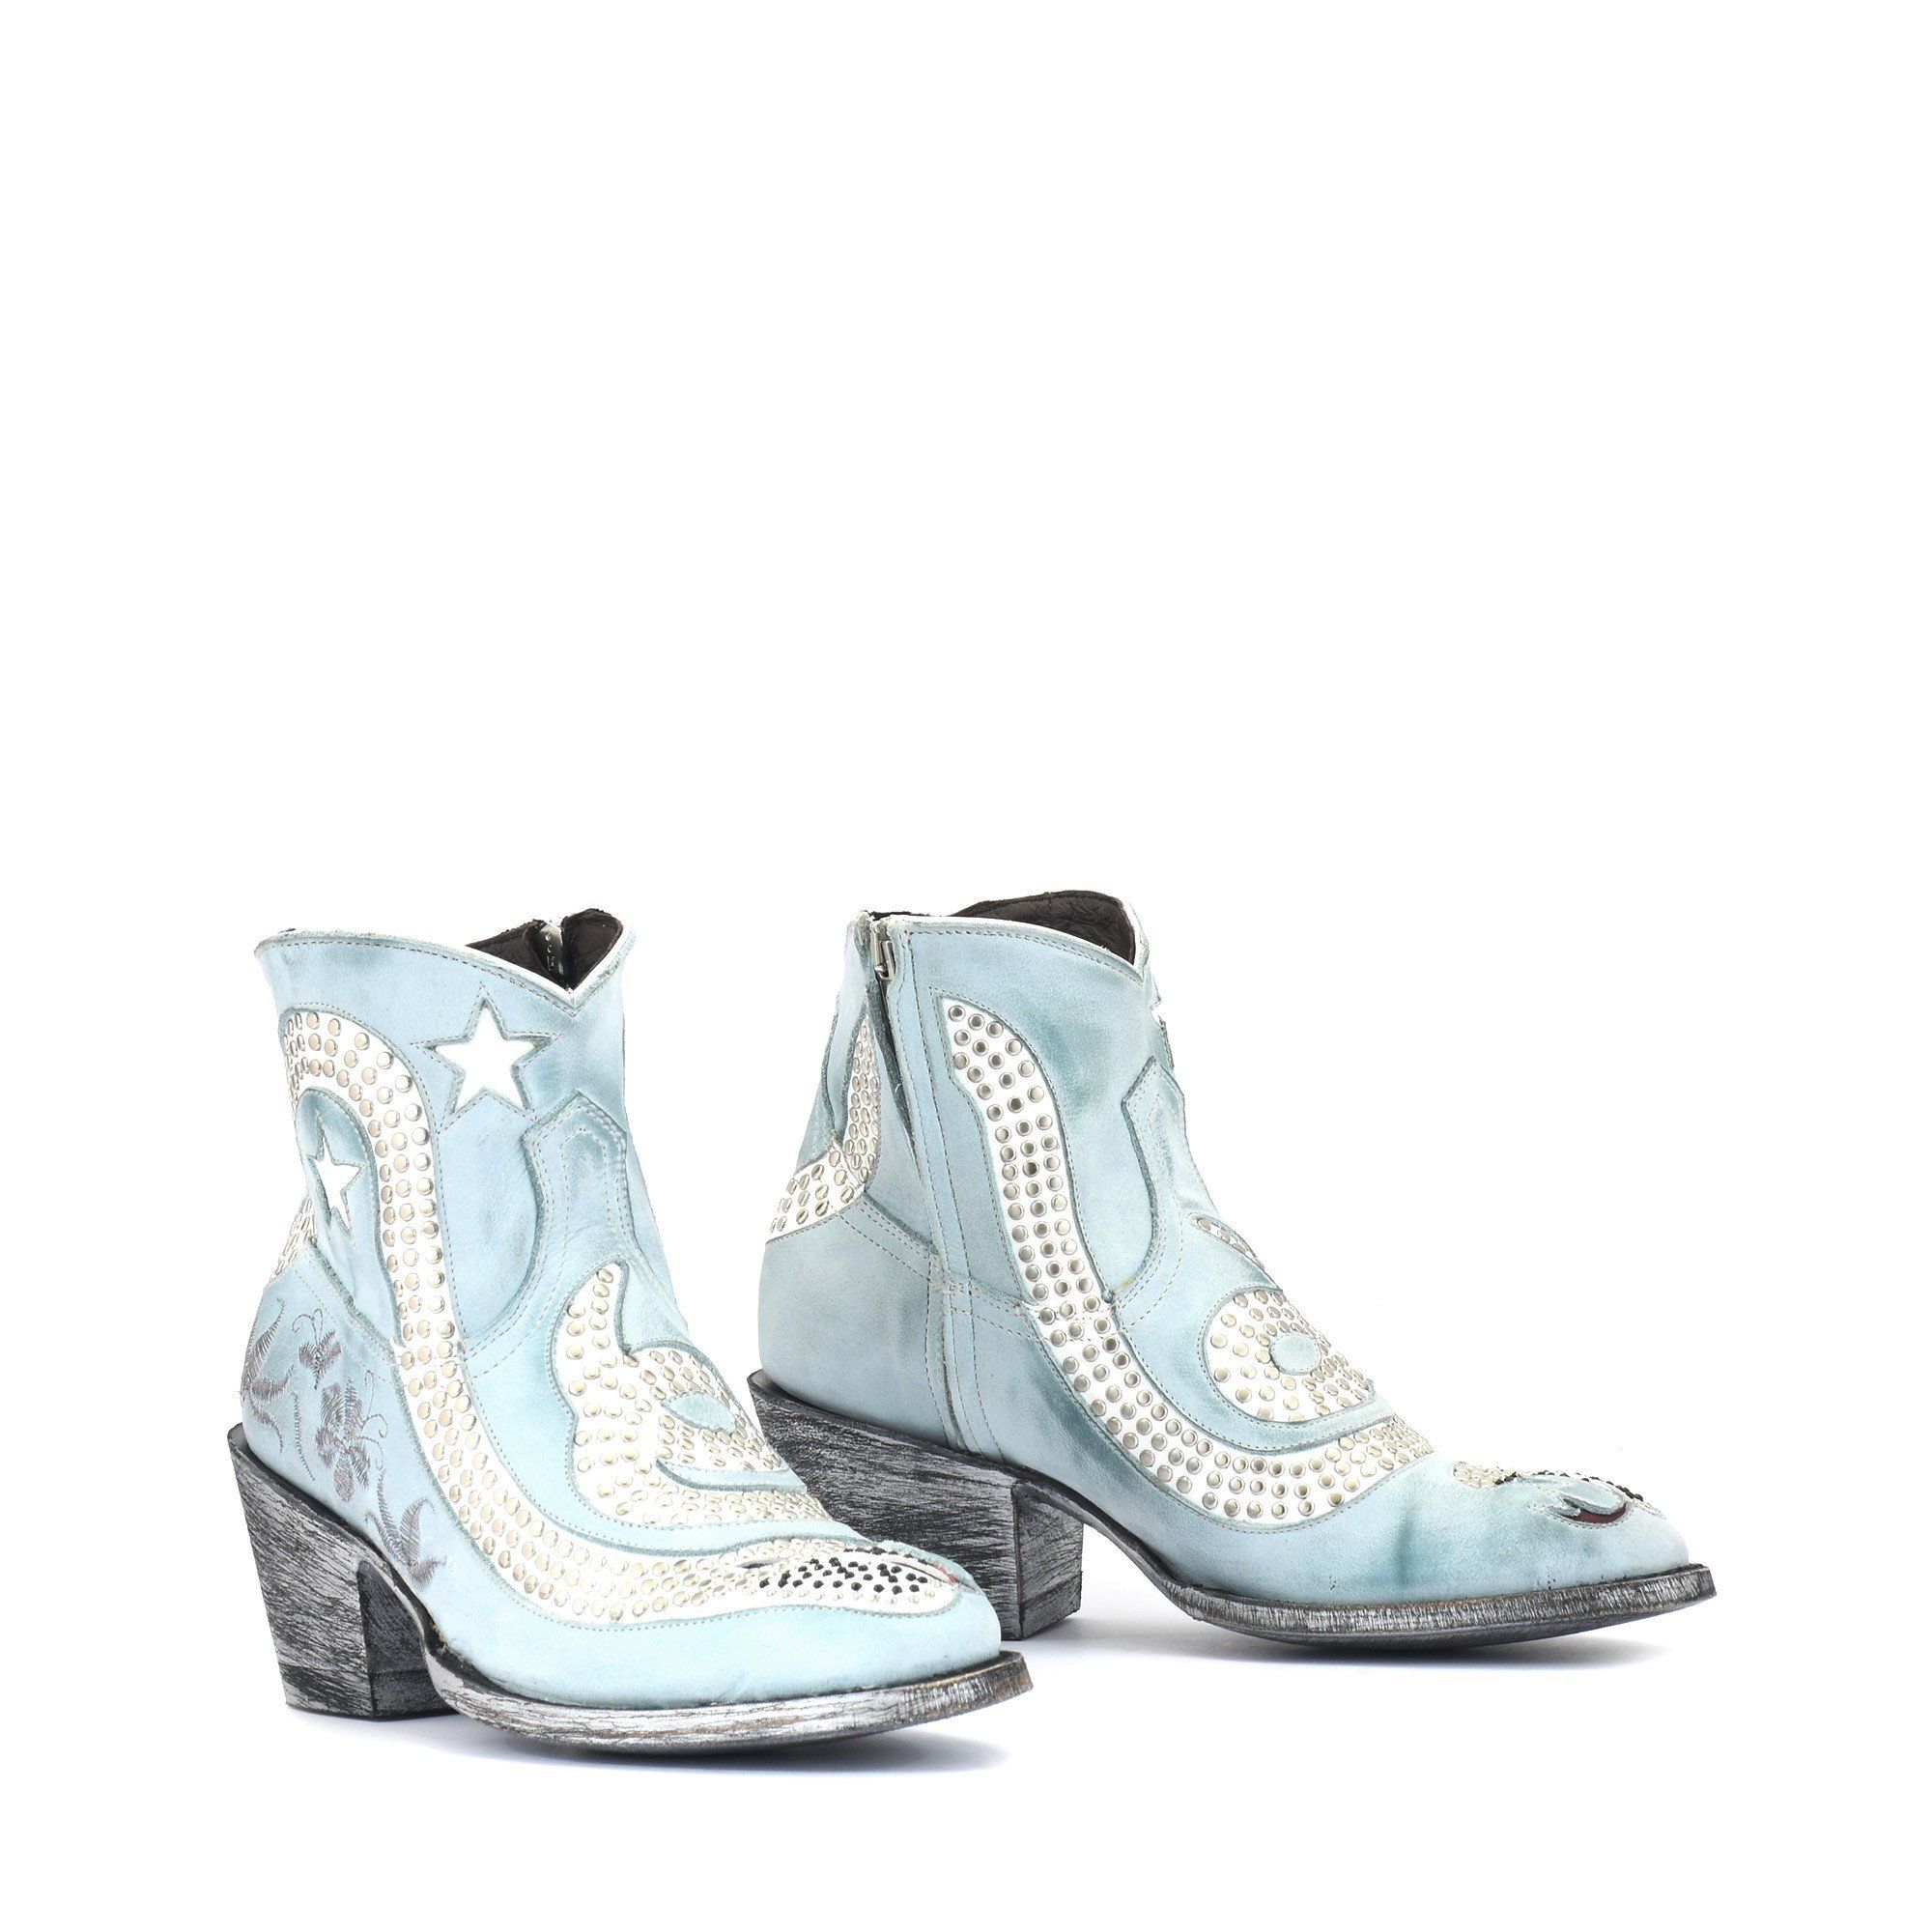 CORIUS SNAKE BLUE SKY ROUNDED TOE ANKLE BOOTS WITH  STUDS  AND SNAKE OUTCUTS   Total heel height 2.6 Inches  100% cow leather  C